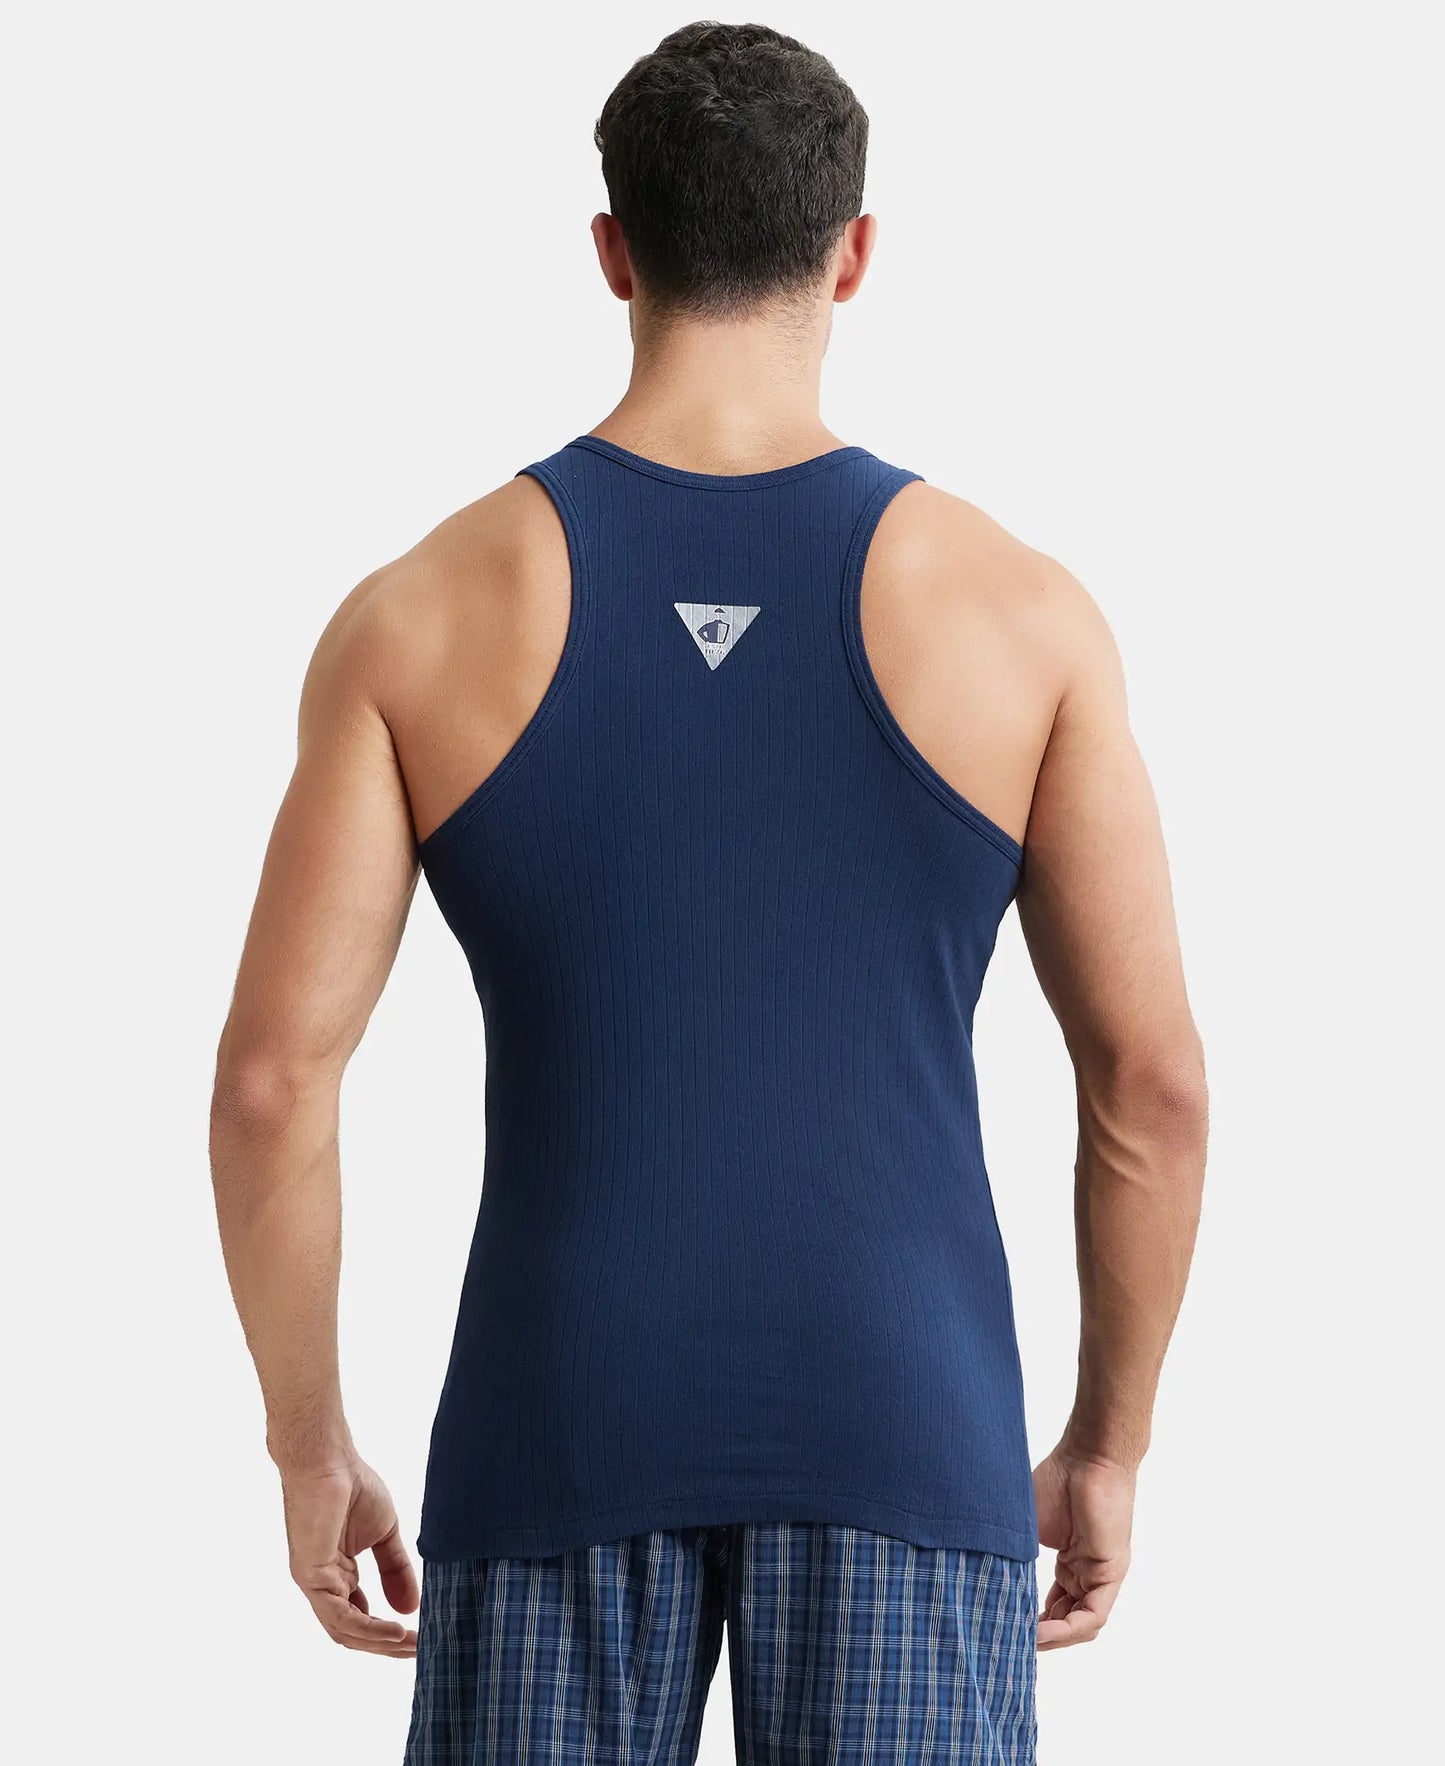 Super Combed Cotton Rib Round Neck with Racer Back Gym Vest - Navy-3